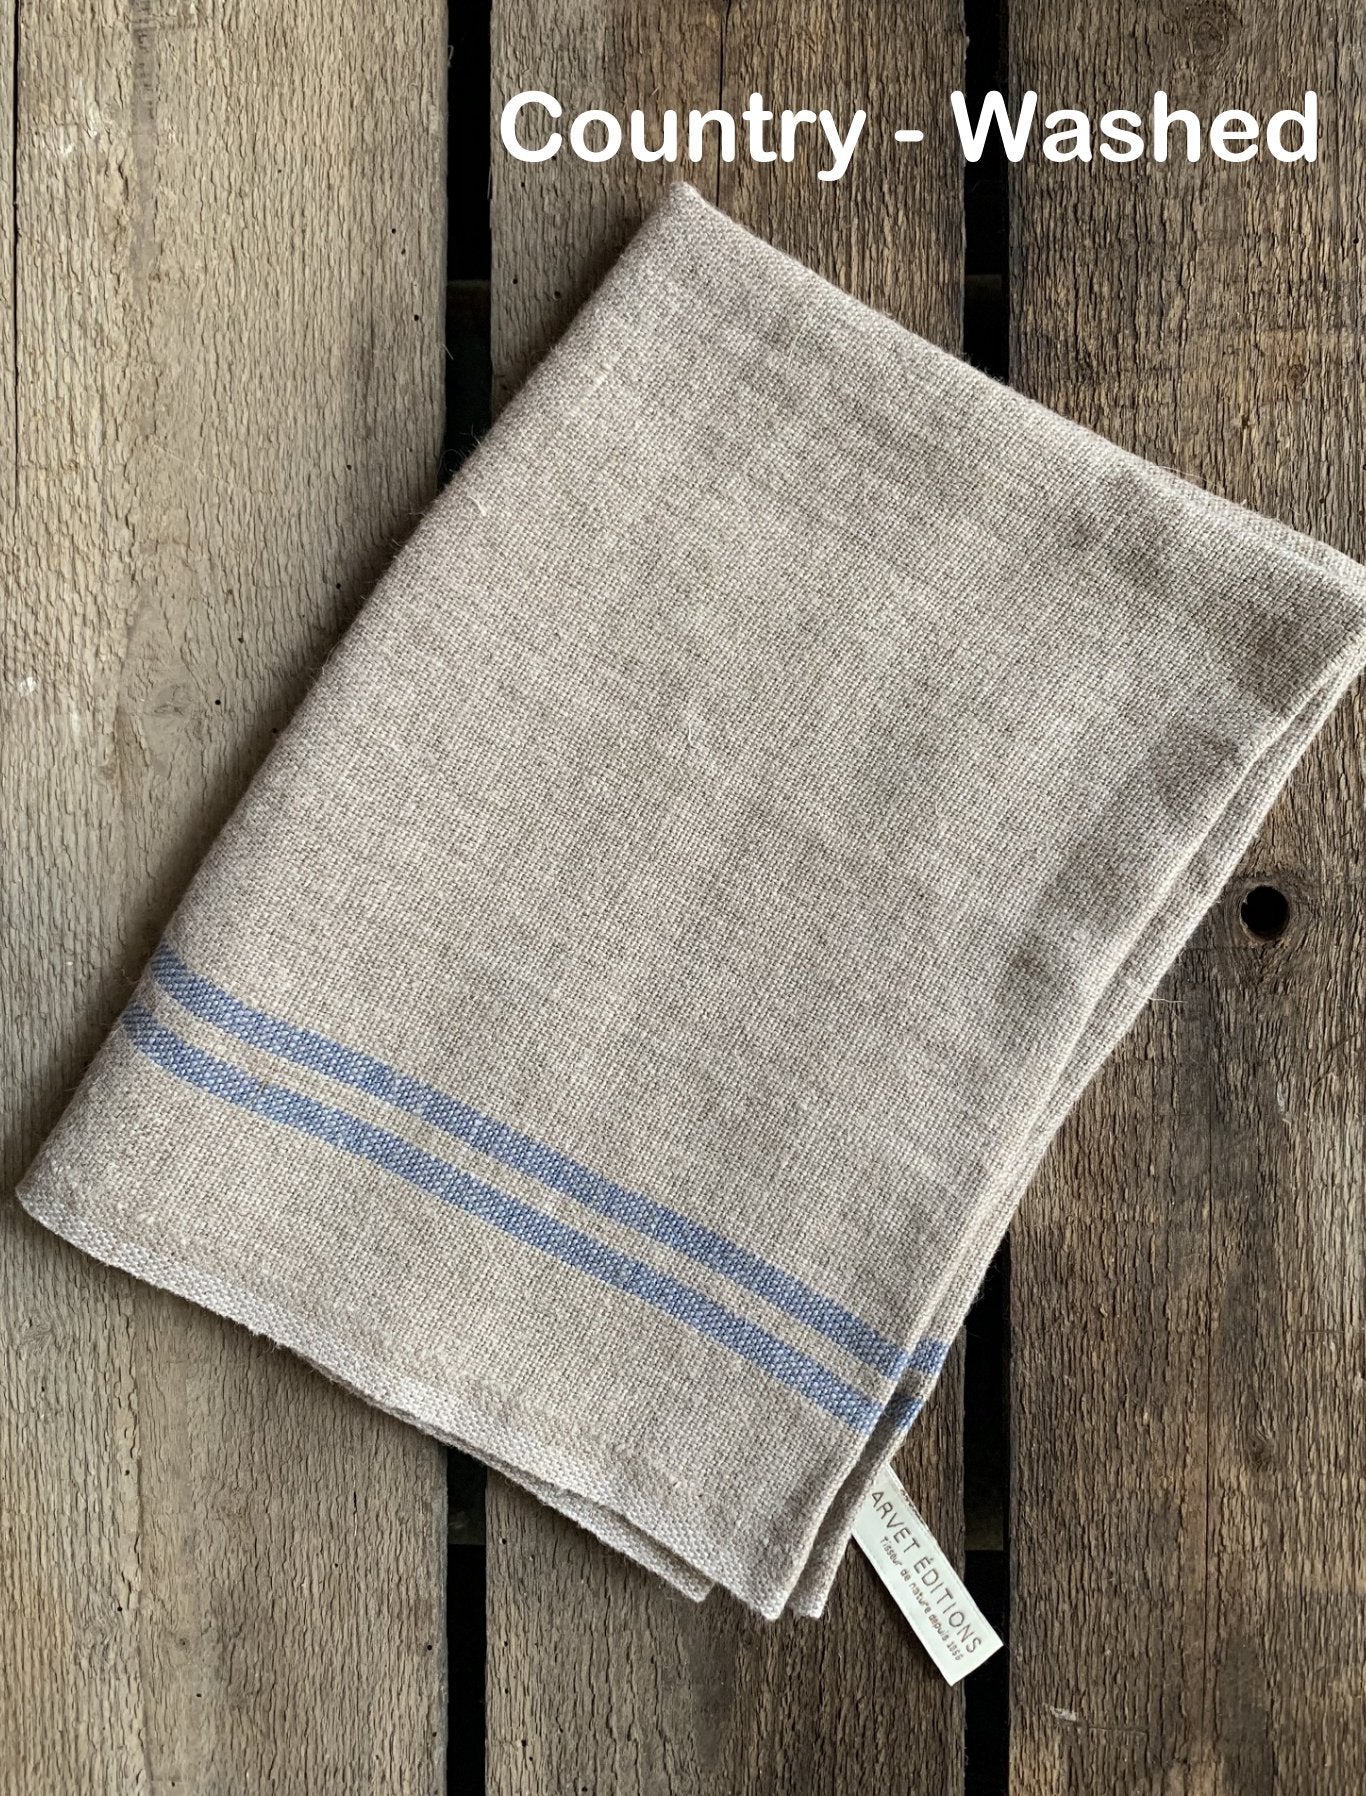 Charvet Éditions "Country Washed" (Blue), Natural woven linen tea towel. Made in France.